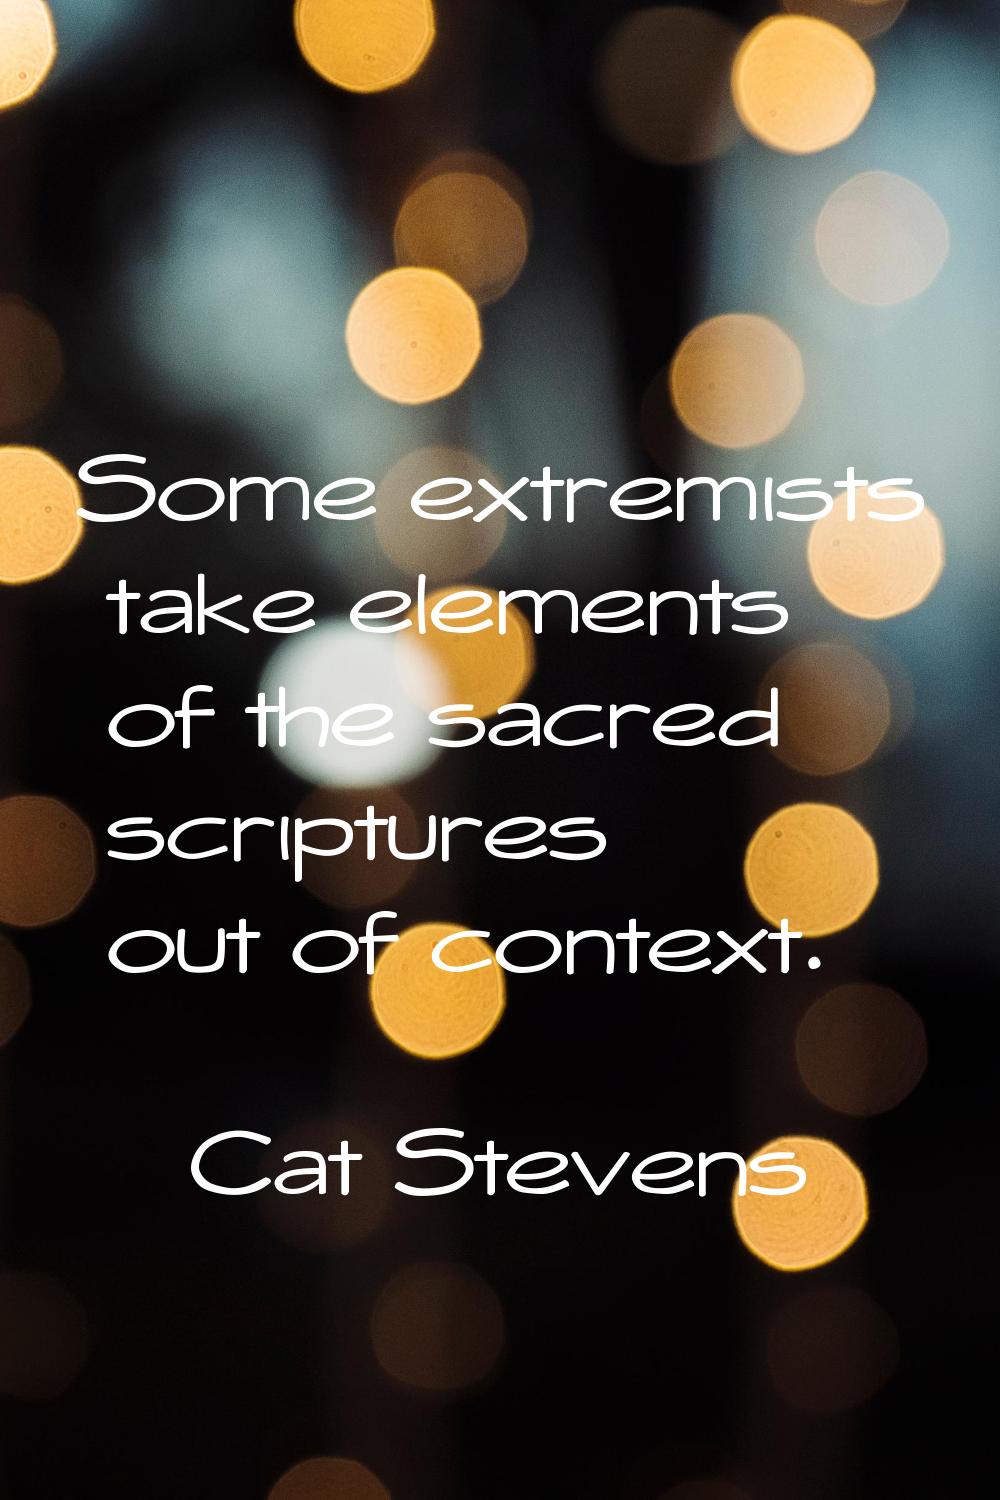 Some extremists take elements of the sacred scriptures out of context.